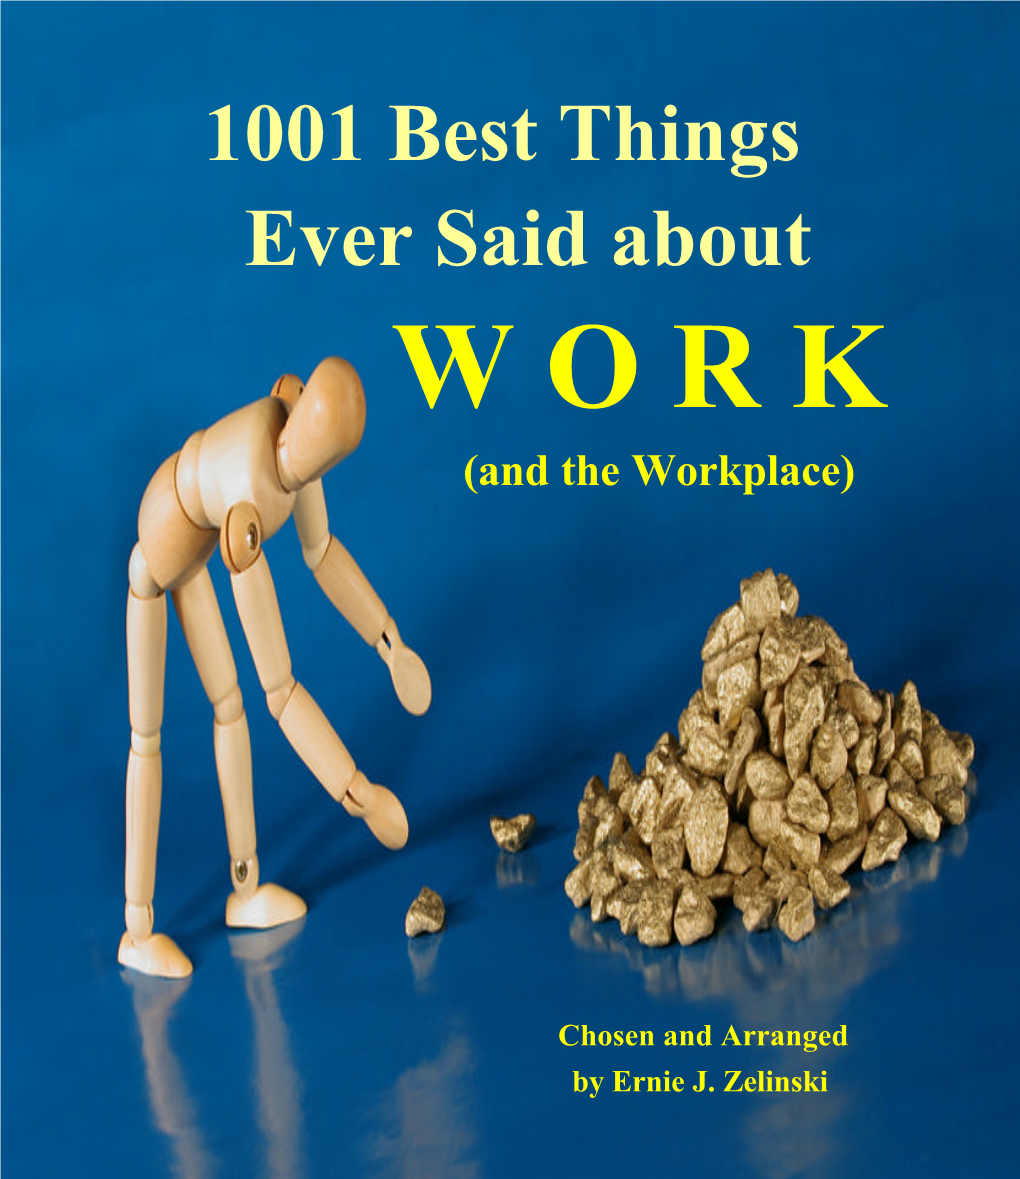 1001 Best Things Ever Said About W O R K (And the Workplace)